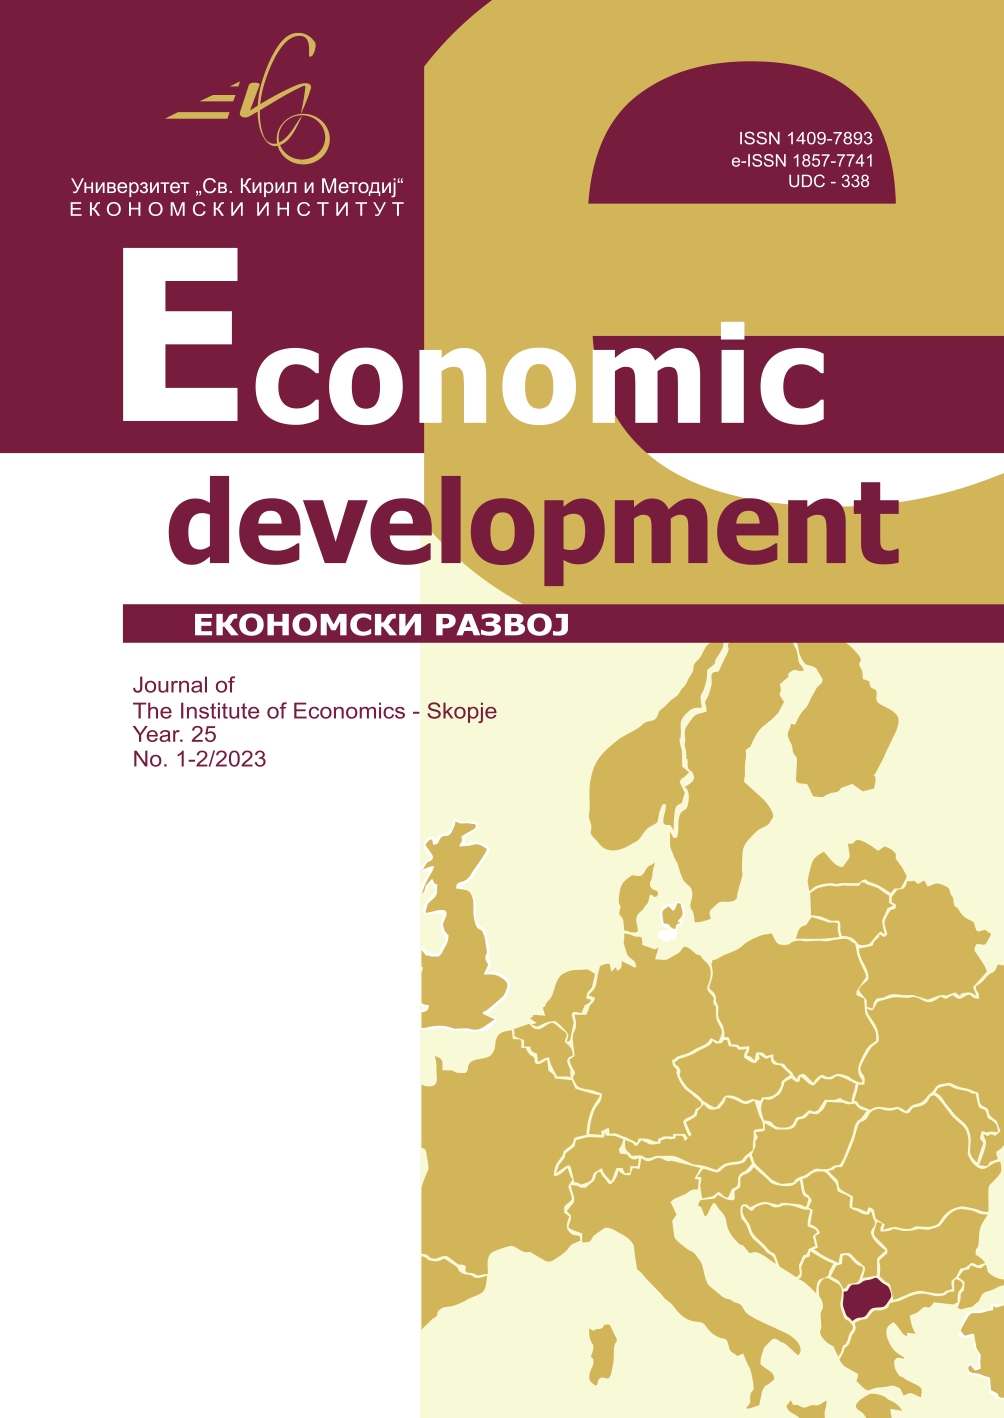 THE RELATIONSHIP BETWEEN STOCK MARKET & ECONOMIC ACTIVITY DURING THE COVID 19 PANDEMIC IN SOUTHEASTERN EUROPE Cover Image